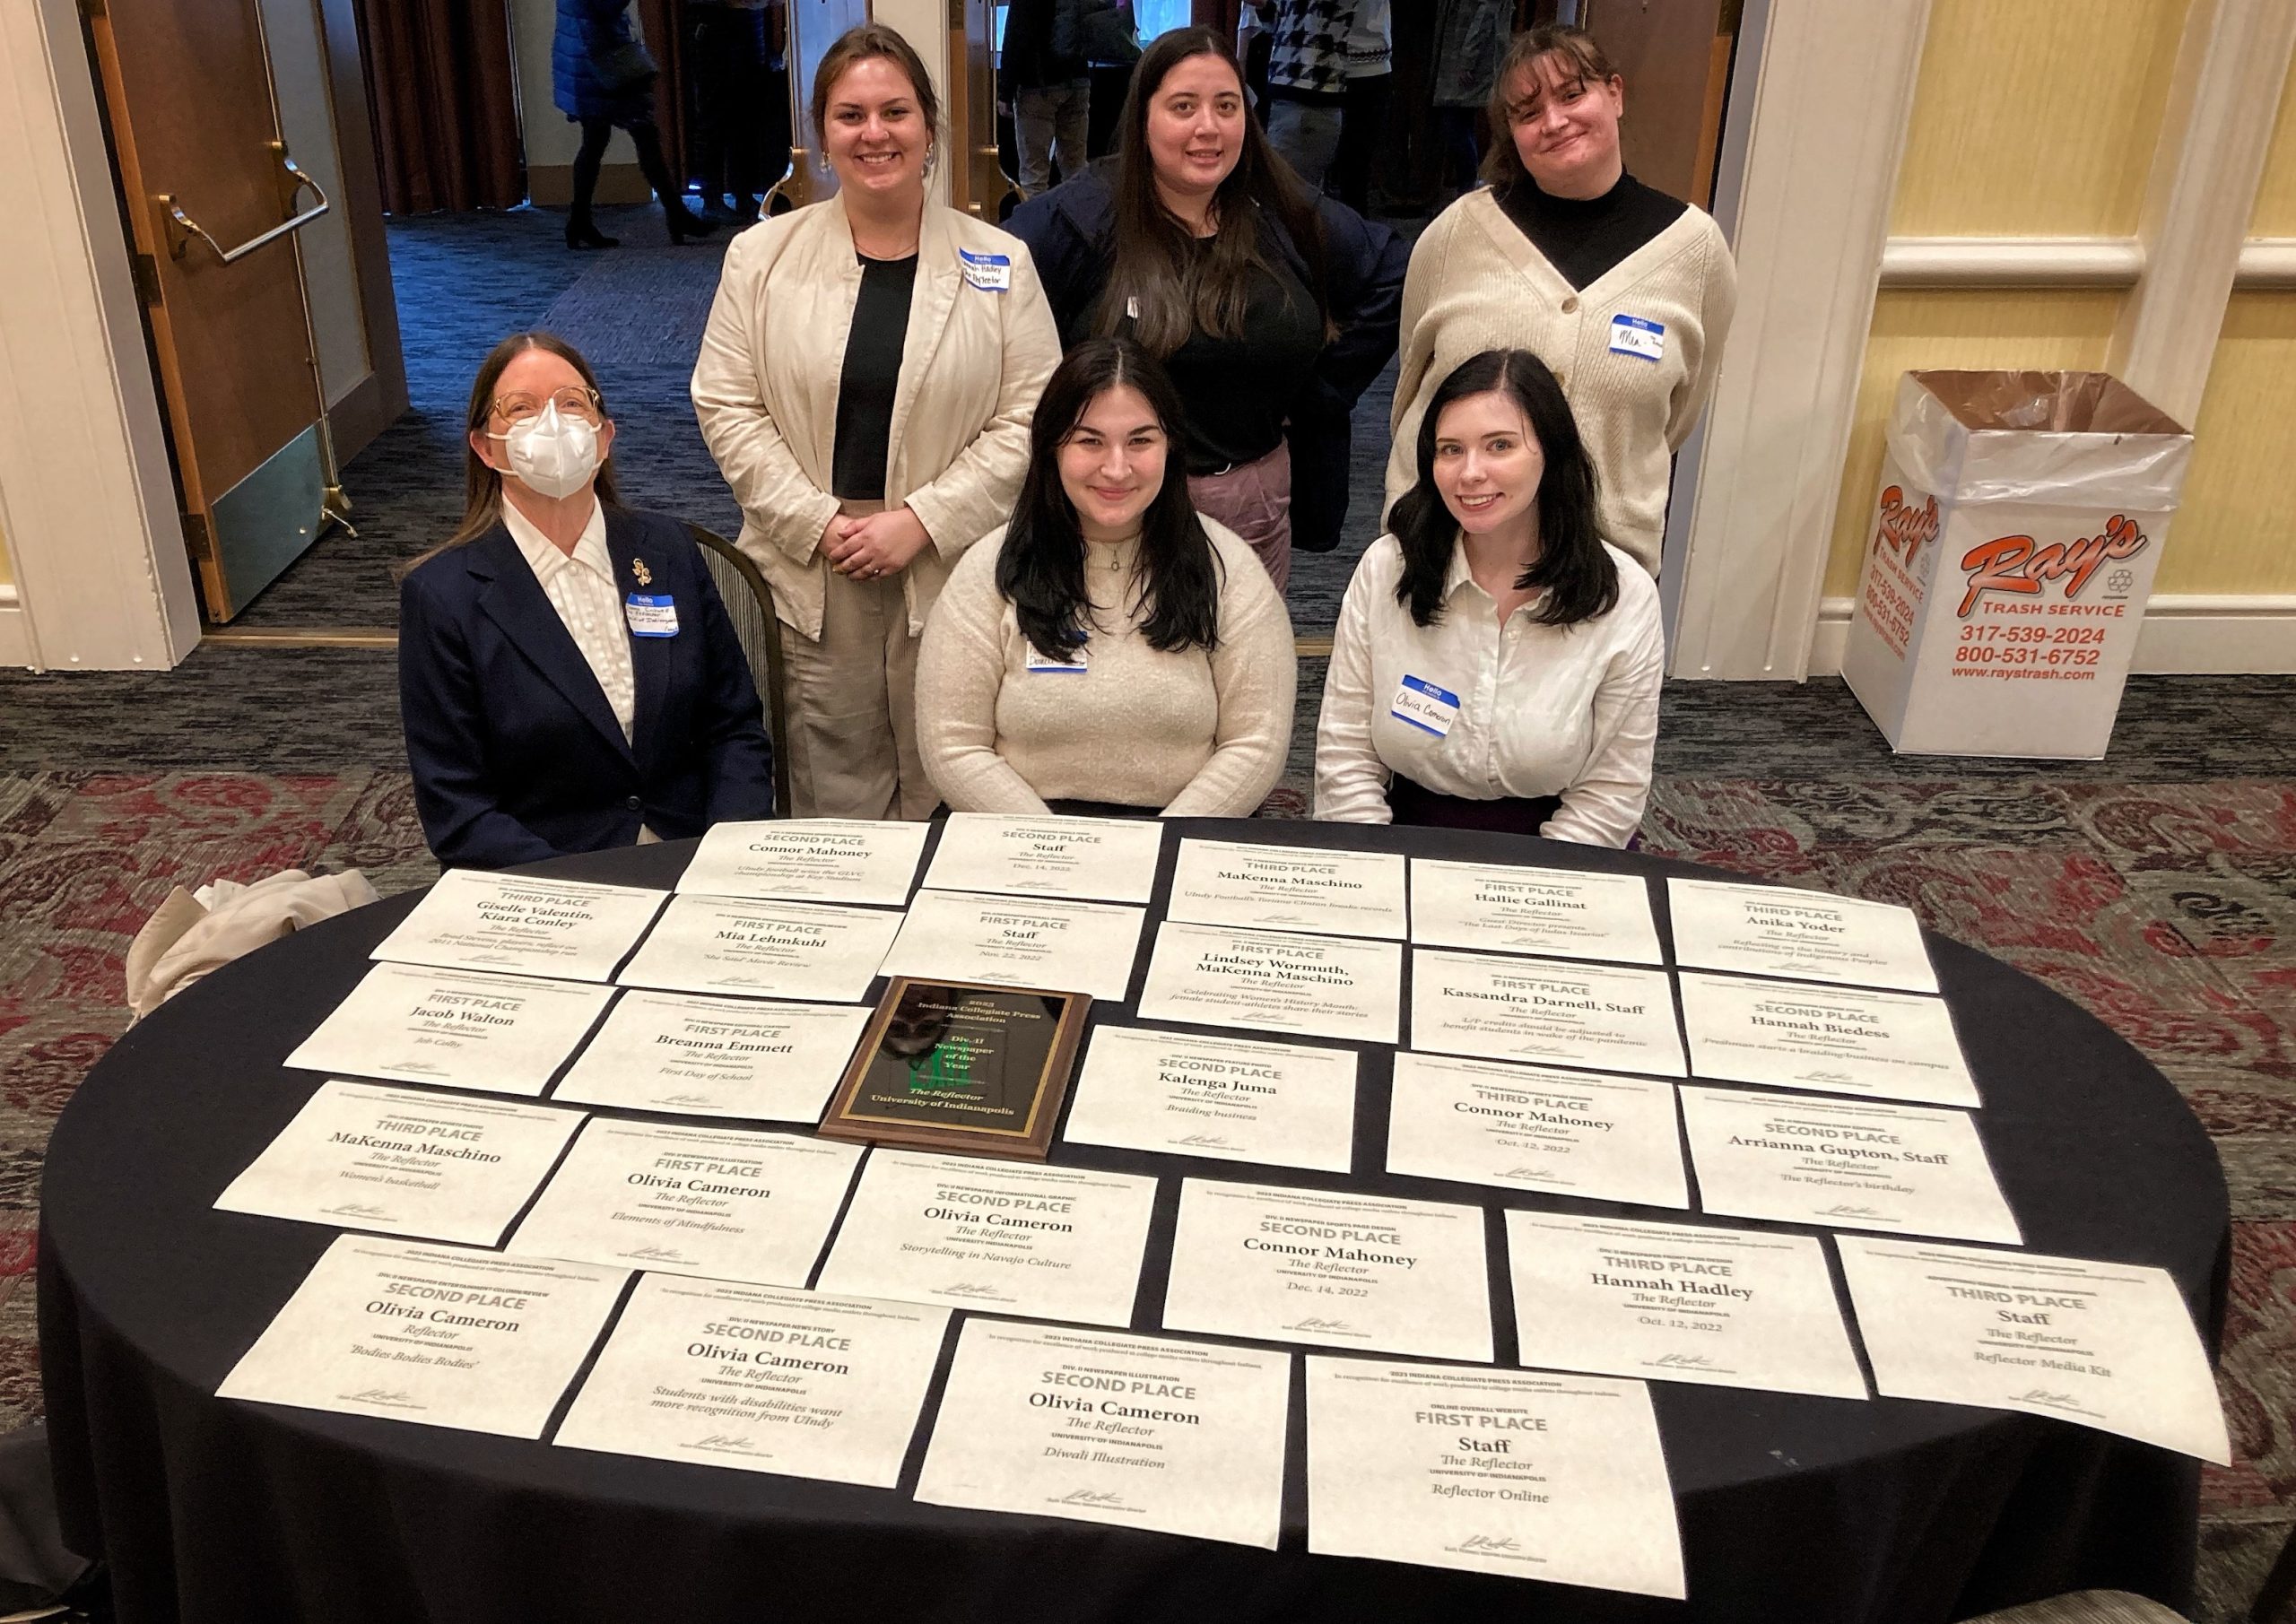 Reflector staff poses with awards from 2023 ICPA Awards